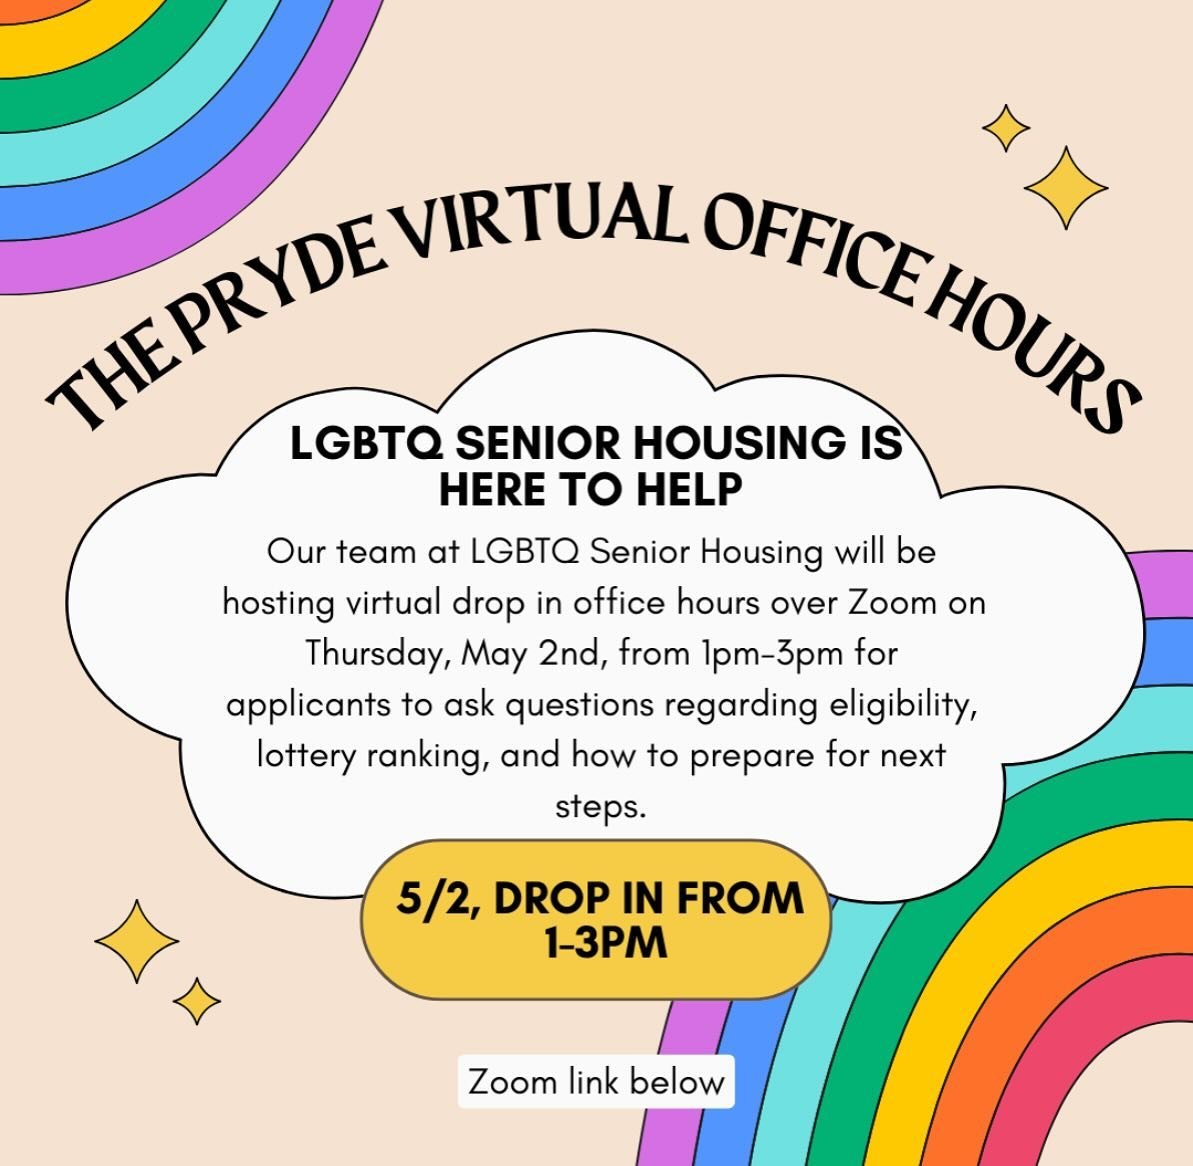 Have any questions about your lottery ranking, or application next steps? Join us this Thursday, May 2nd anytime from 1-3pm over Zoom for office hours. This is will be a drop in Zoom session for applicants to ask an LGBTQ Senior Housing team member q